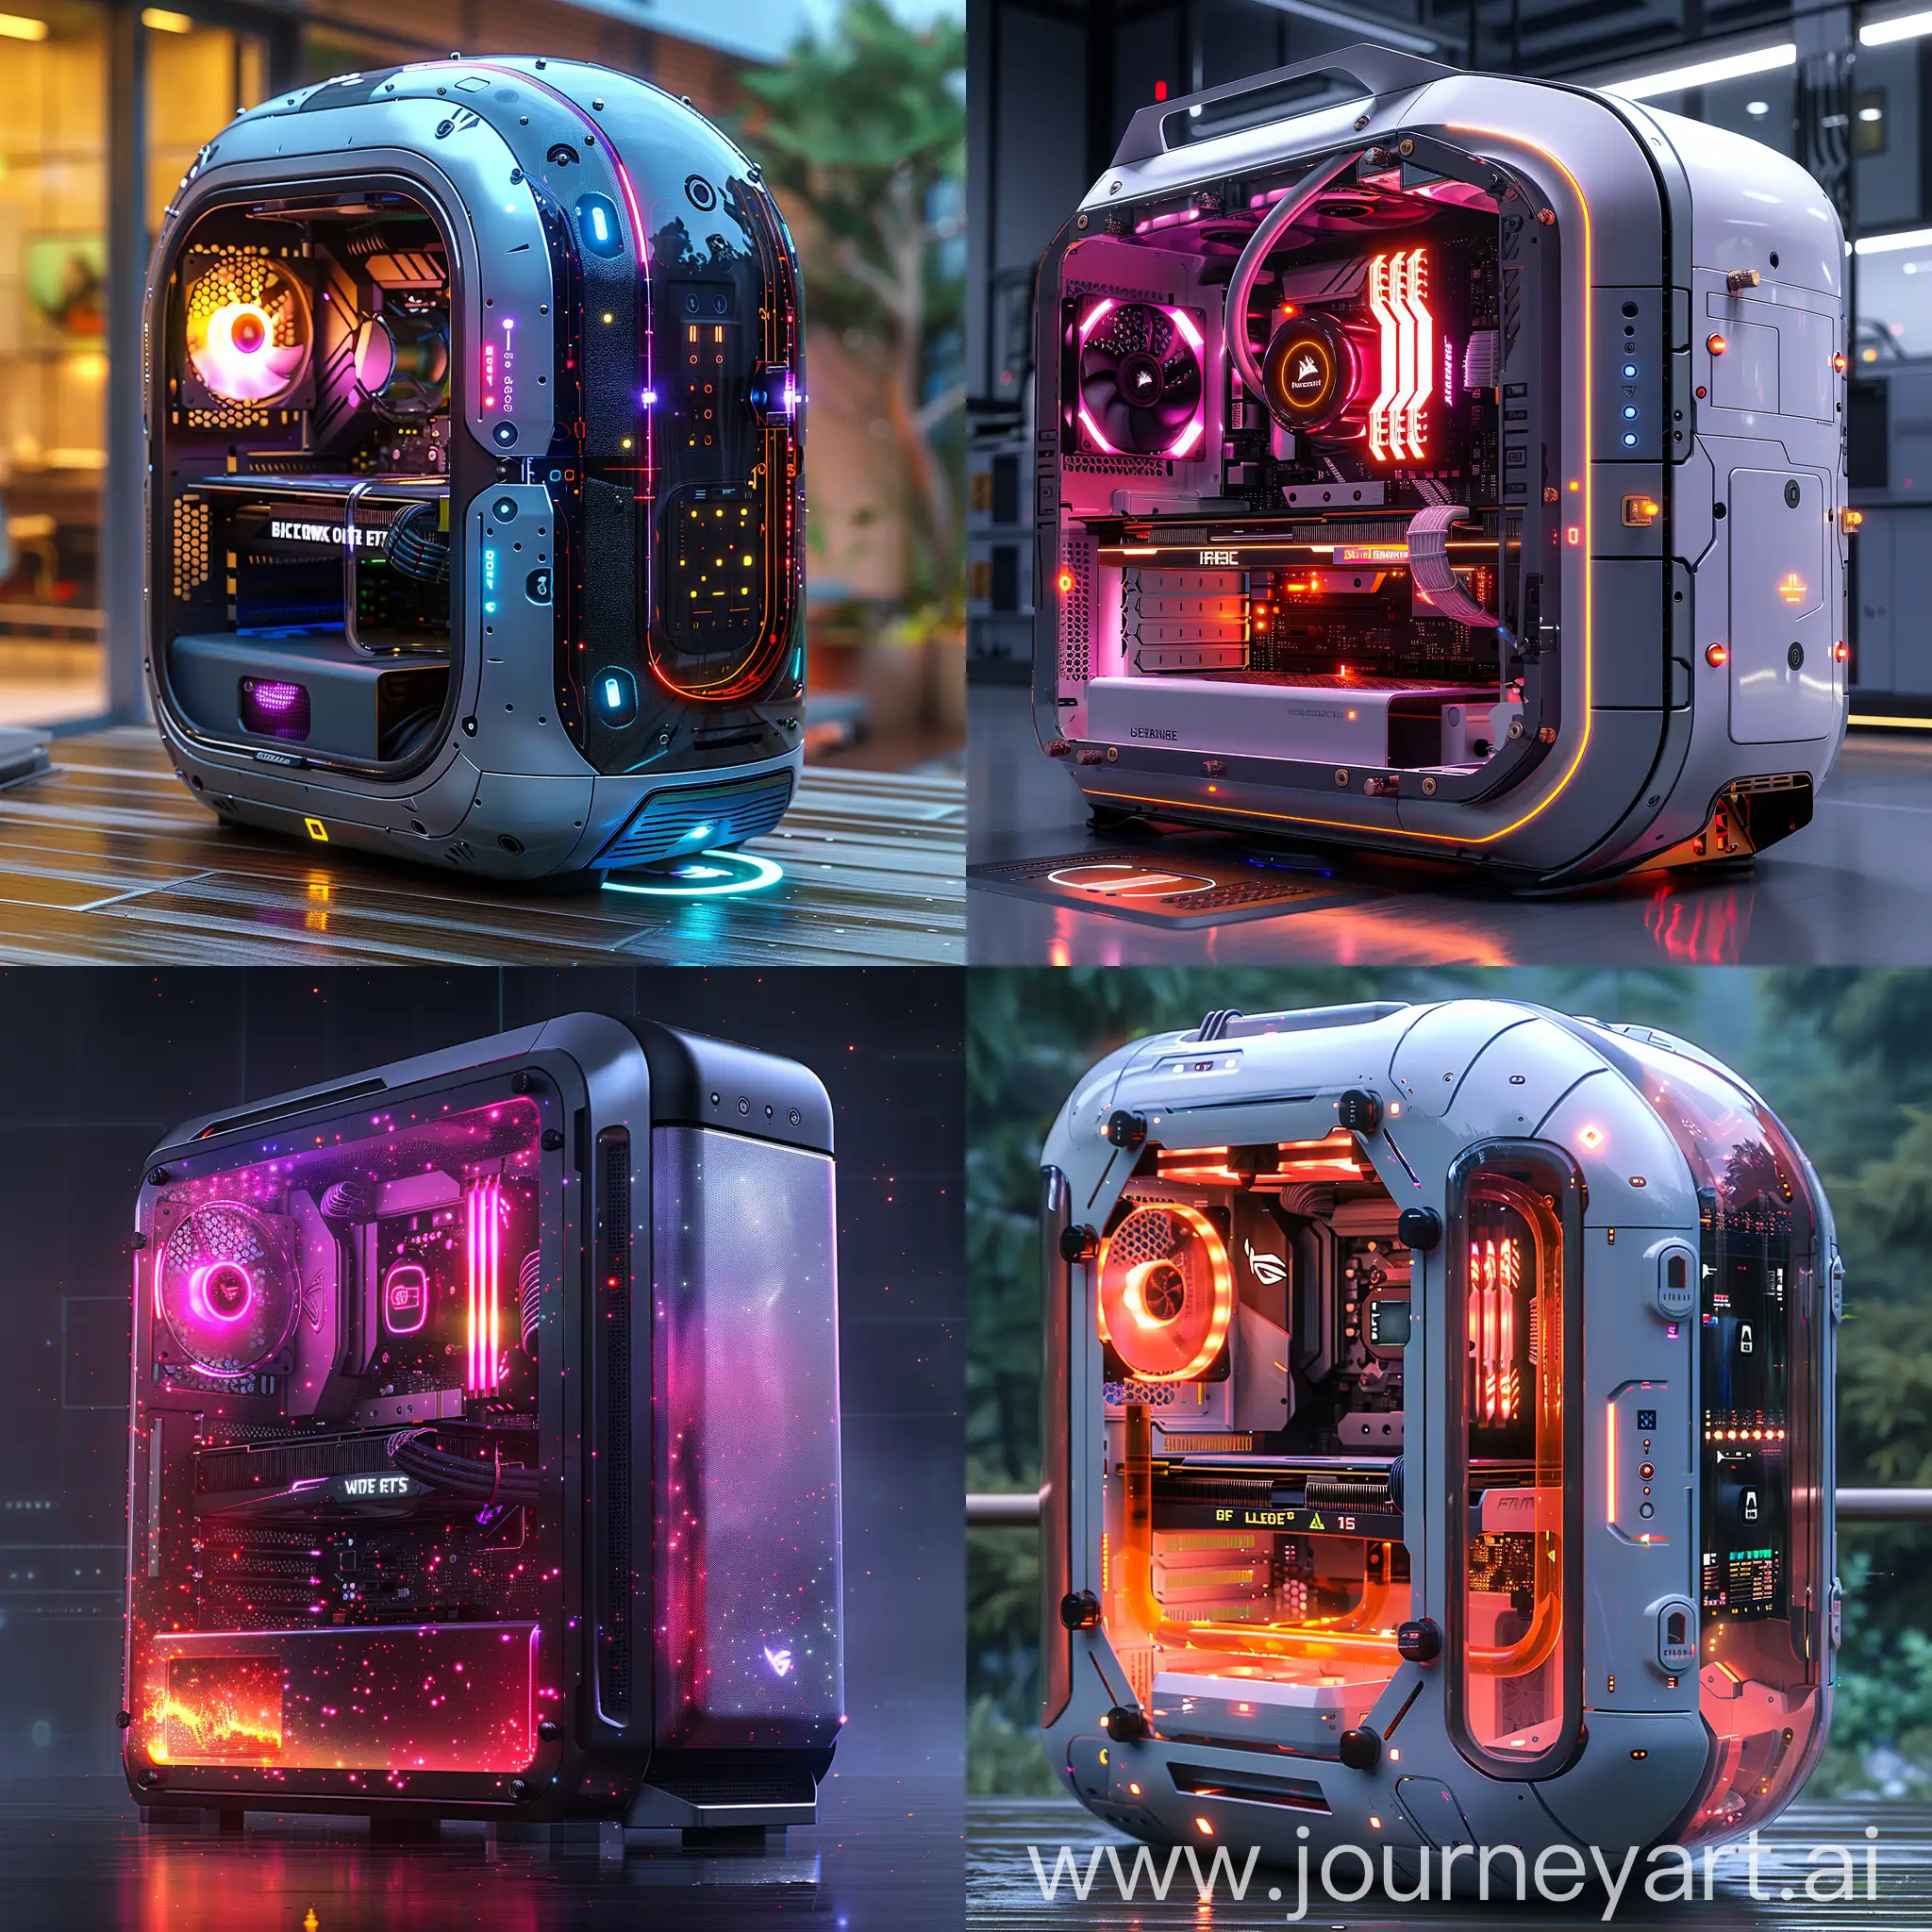 Futuristic-PC-Case-with-Integrated-Liquid-Cooling-and-AIAssisted-Controls